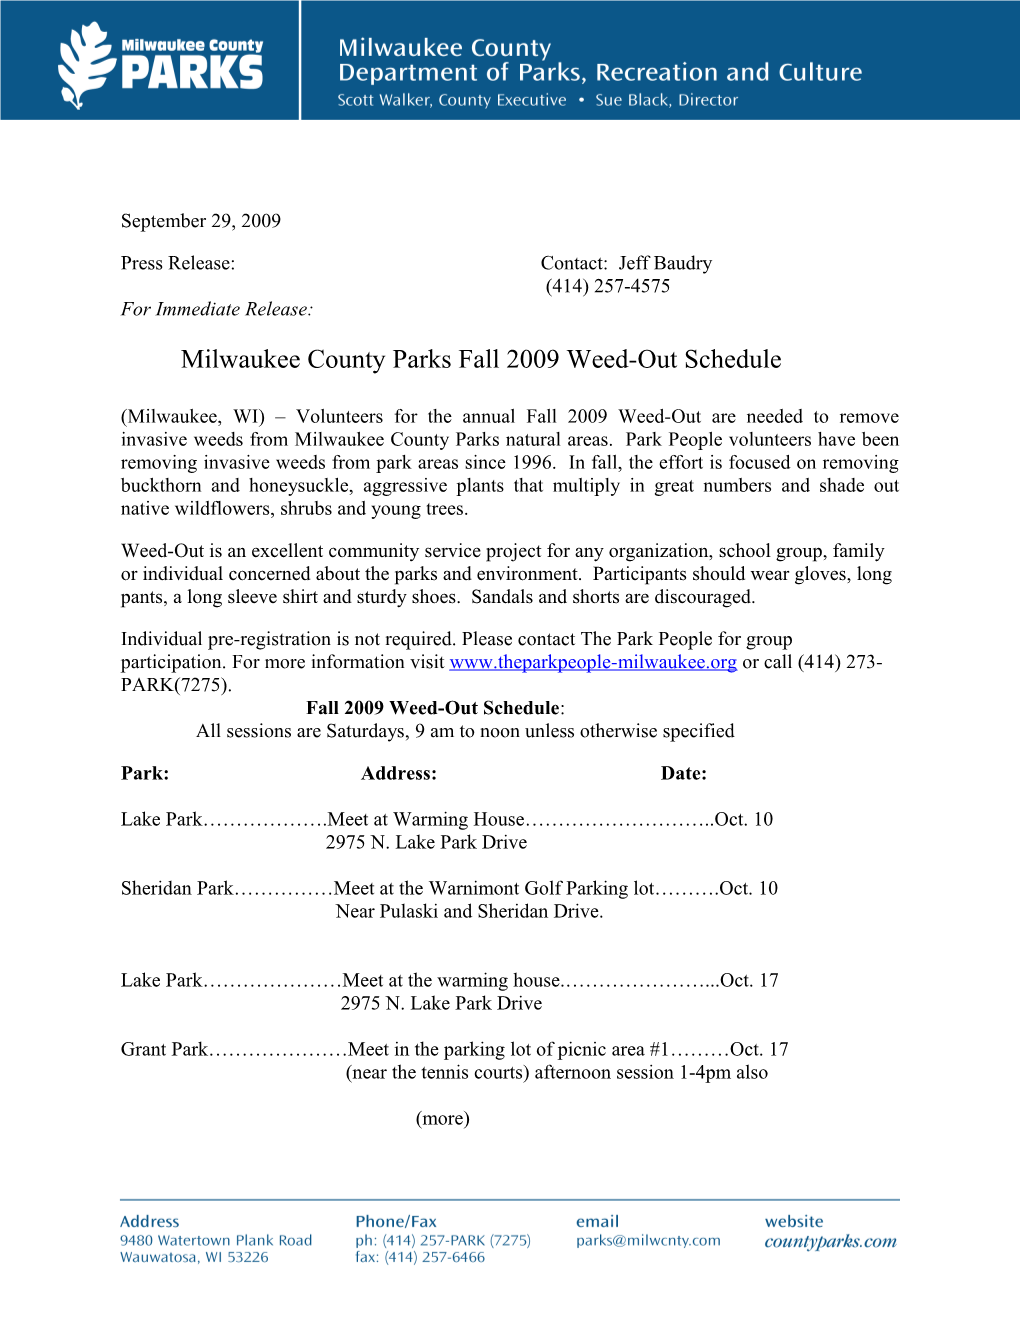 Milwaukee County Parks Fall 2009 Weed-Out Schedule